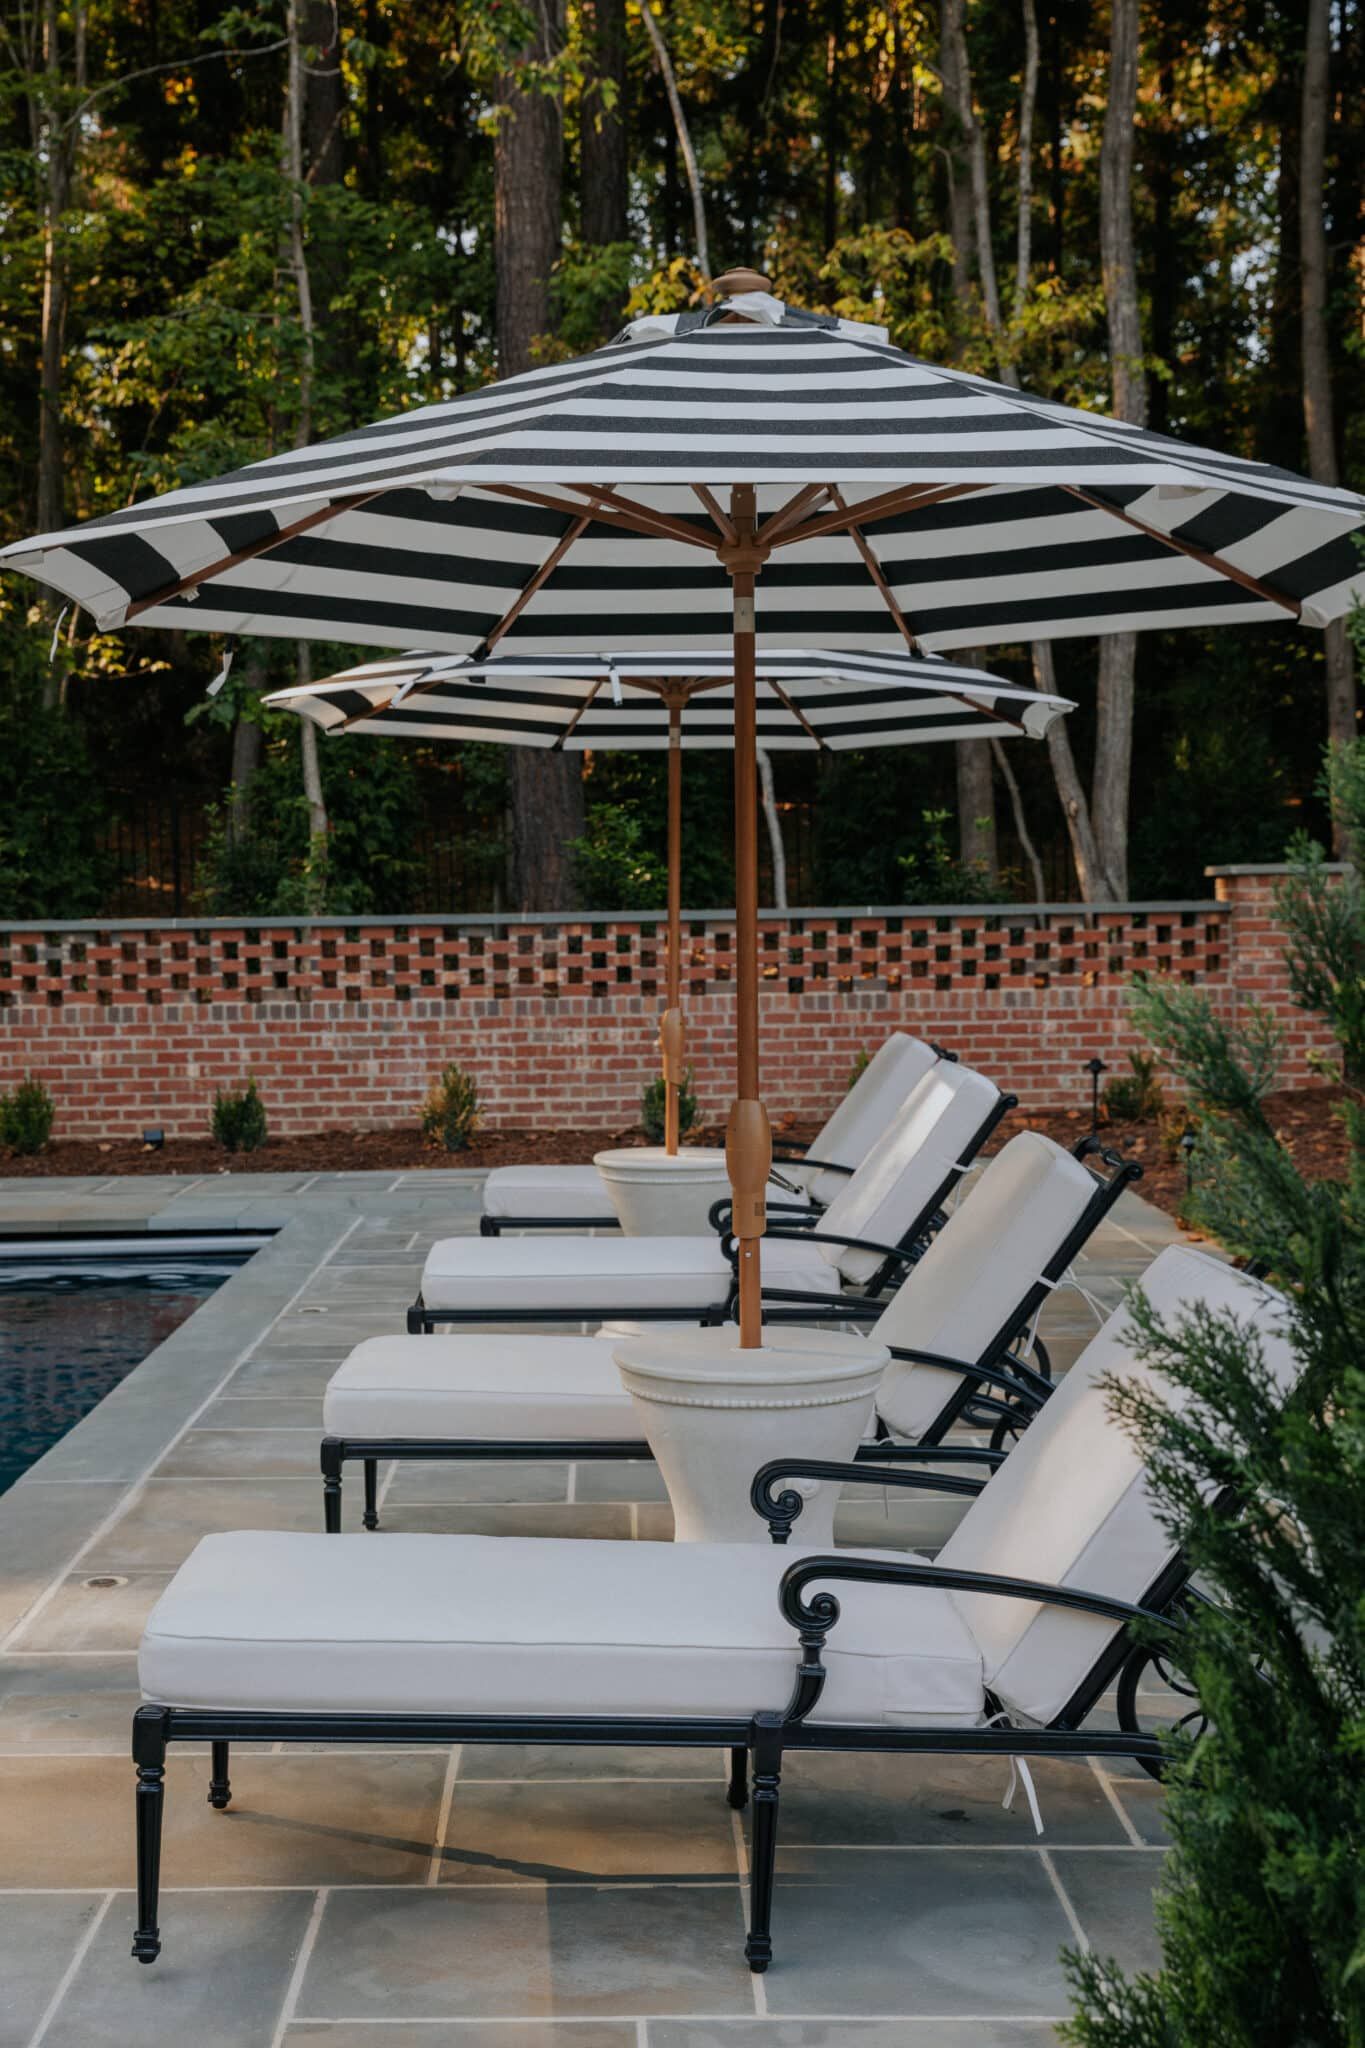 Transform Your Poolside with Stylish
Outdoor Furniture